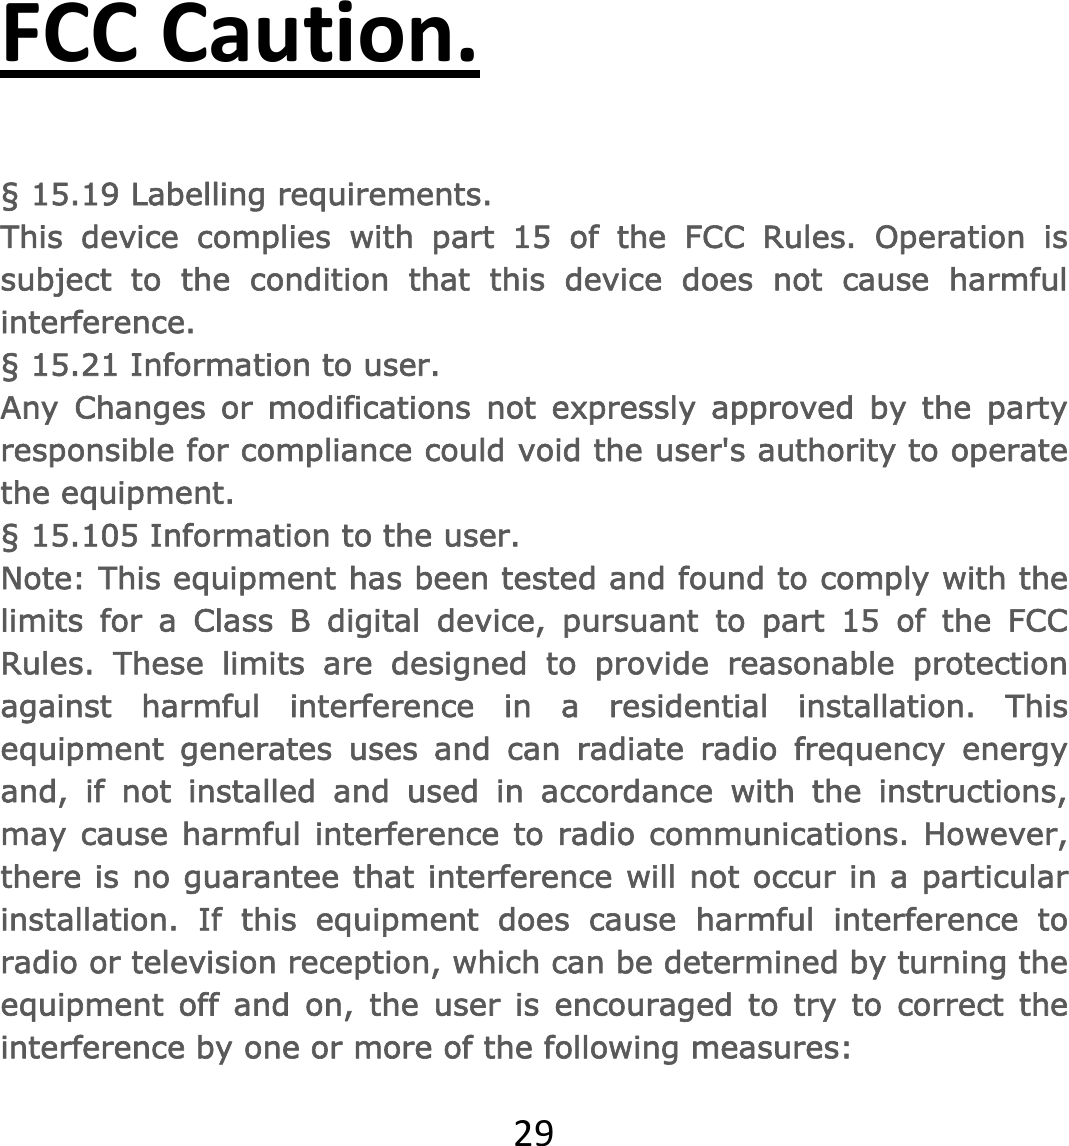 29FCCCaution.§ 15.19 Labelling requirements.This device complies with part 15 of the FCC Rules. Operation is subject to the condition that this device does not cause harmful interference. § 15.21 Information to user.Any Changes or modifications not expressly approved by the party responsible for compliance could void the user&apos;s authority to operate the equipment. § 15.105 Information to the user.Note: This equipment has been tested and found to comply with the limits for a Class B digital device, pursuant to part 15 of the FCC Rules. These limits are designed to provide reasonable protection against harmful interference in a residential installation. This equipment generates uses and can radiate radio frequency energy and, if not installed and used in accordance with the instructions, may cause harmful interference to radio communications. However, there is no guarantee that interference will not occur in a particular installation. If this equipment does cause harmful interference to radio or television reception, which can be determined by turning the equipment off and on, the user is encouraged to try to correct the interference by one or more of the following measures: 